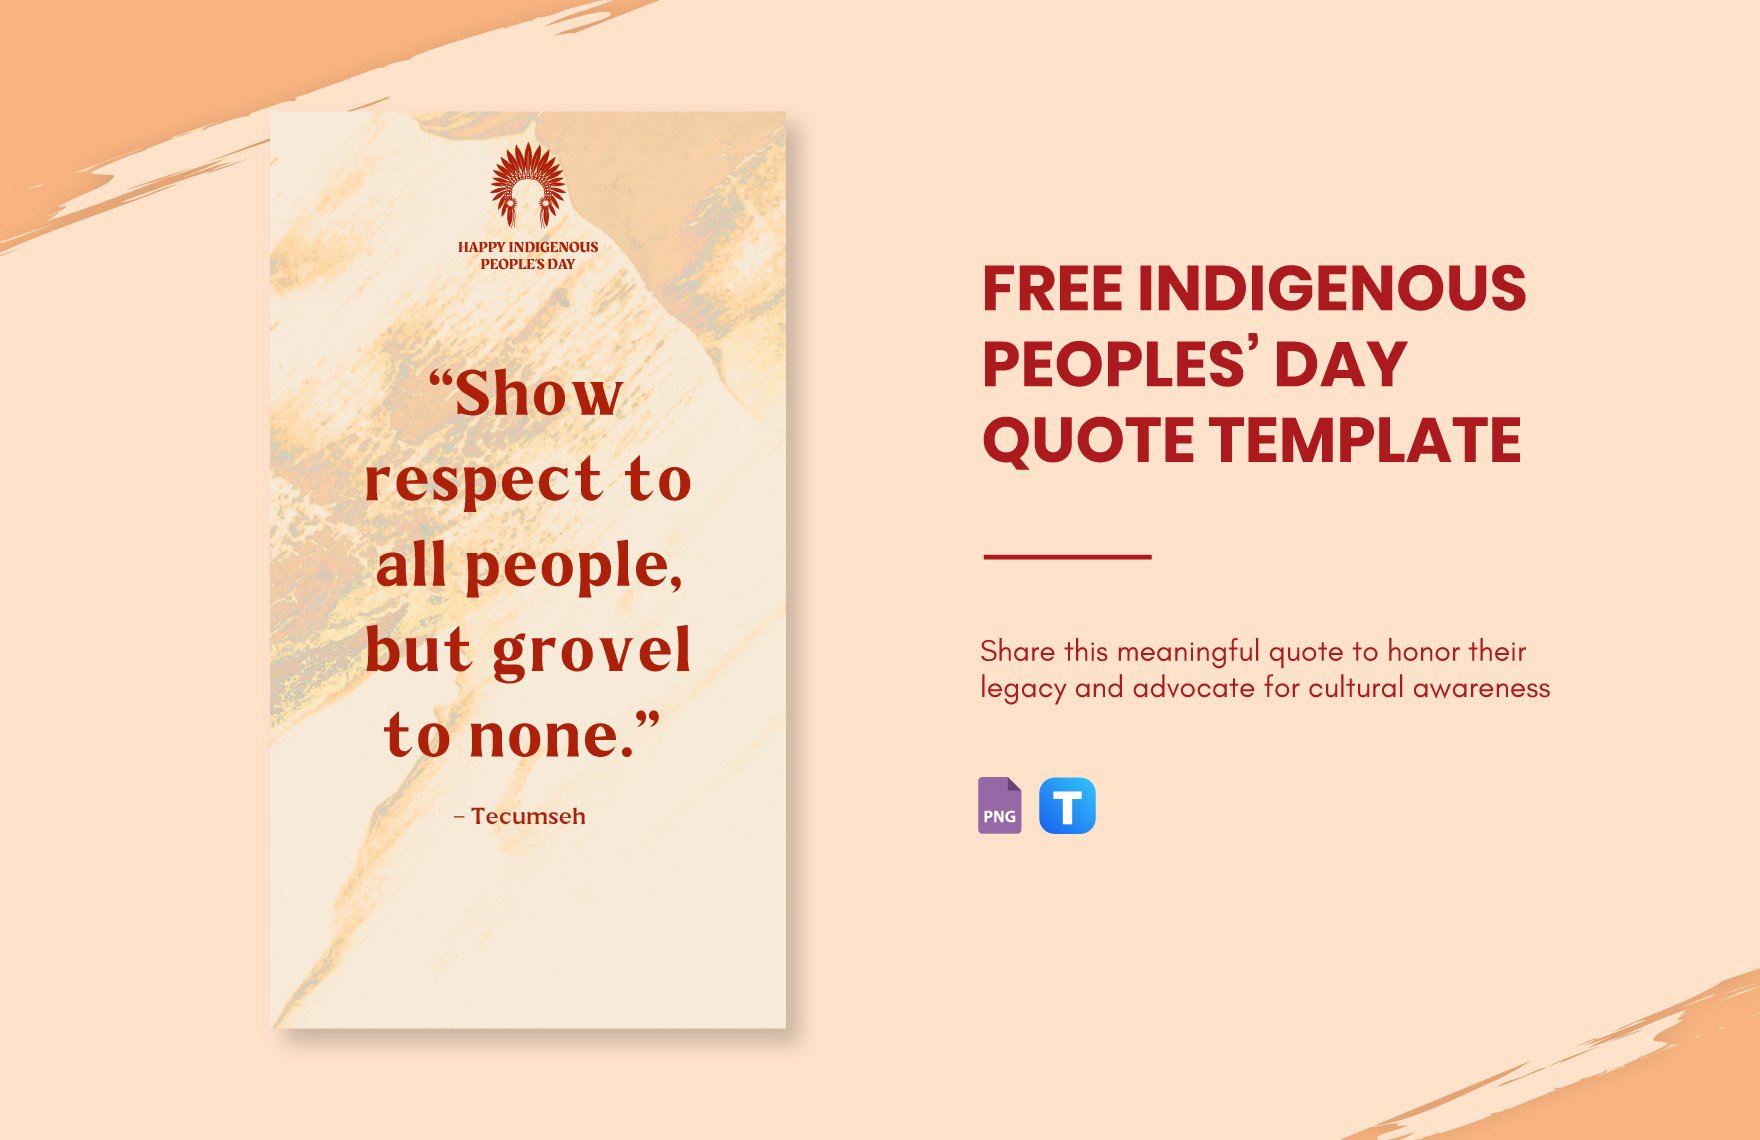 Free Indigenous Peoples' Day Quote